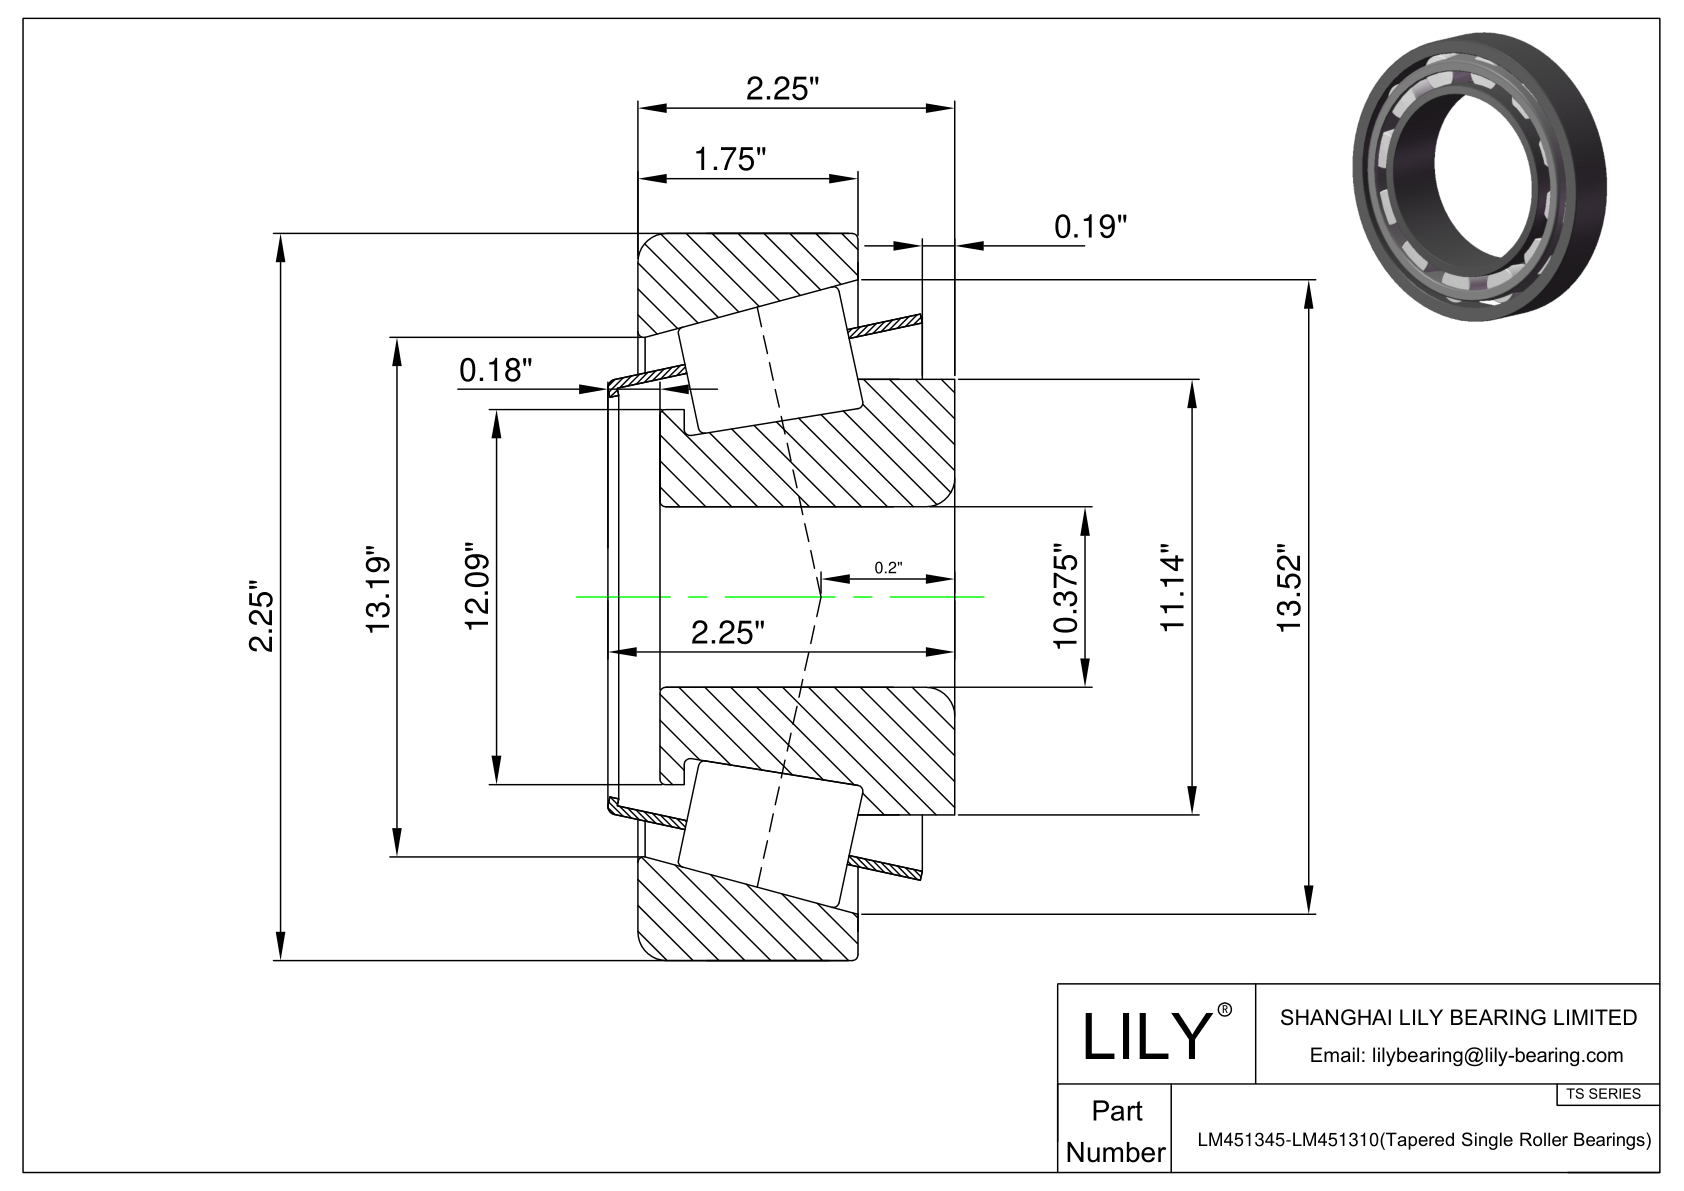 LM451345-LM451310 TS (Tapered Single Roller Bearings) (Imperial) cad drawing